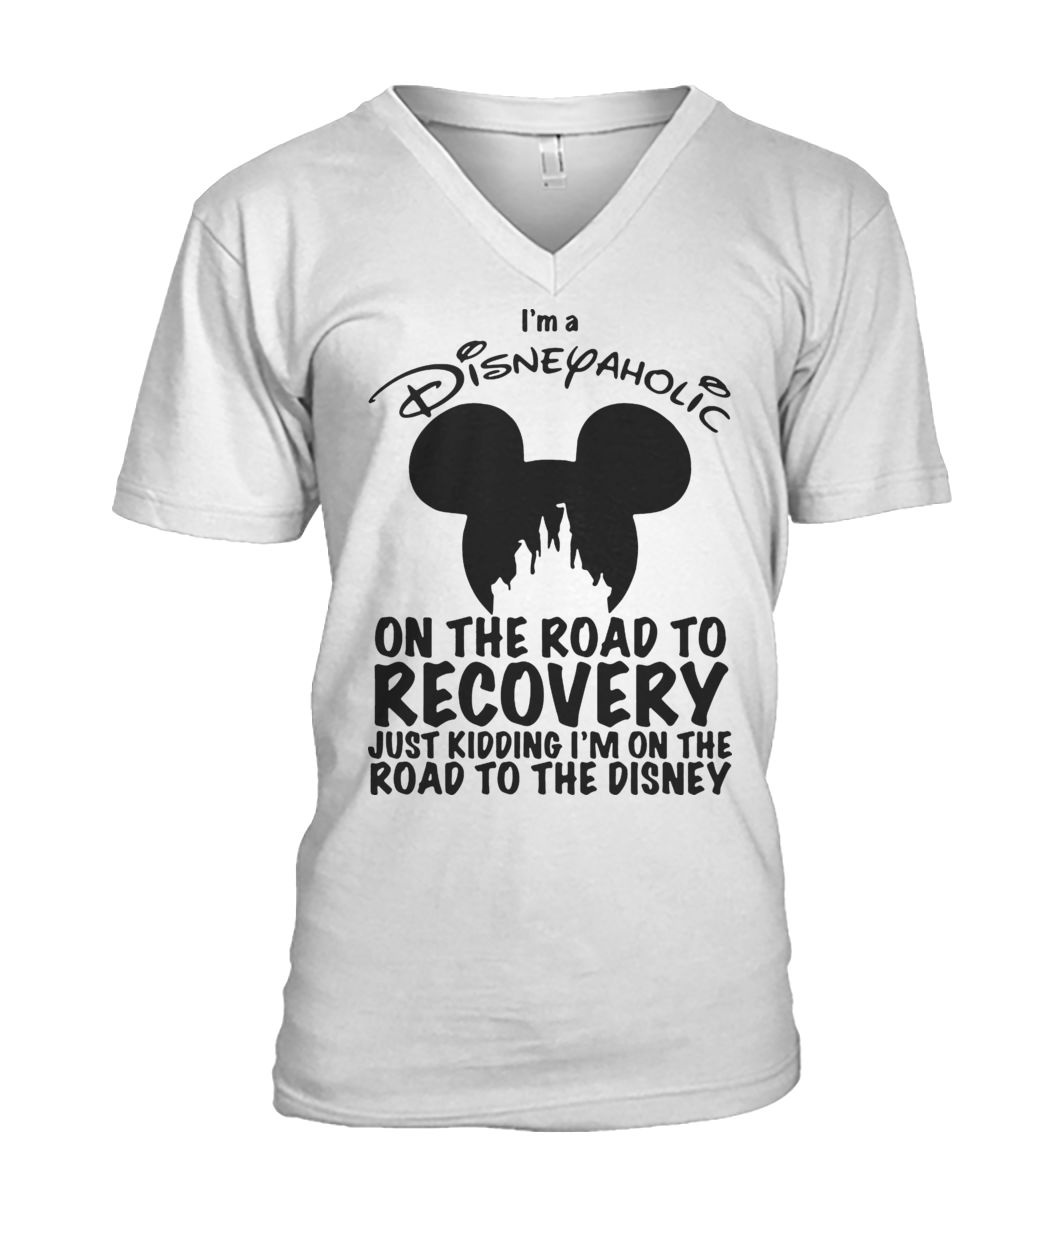 I'm a disneyaholic on the road to recovery just kidding I'm on the road to the disney mens v-neck